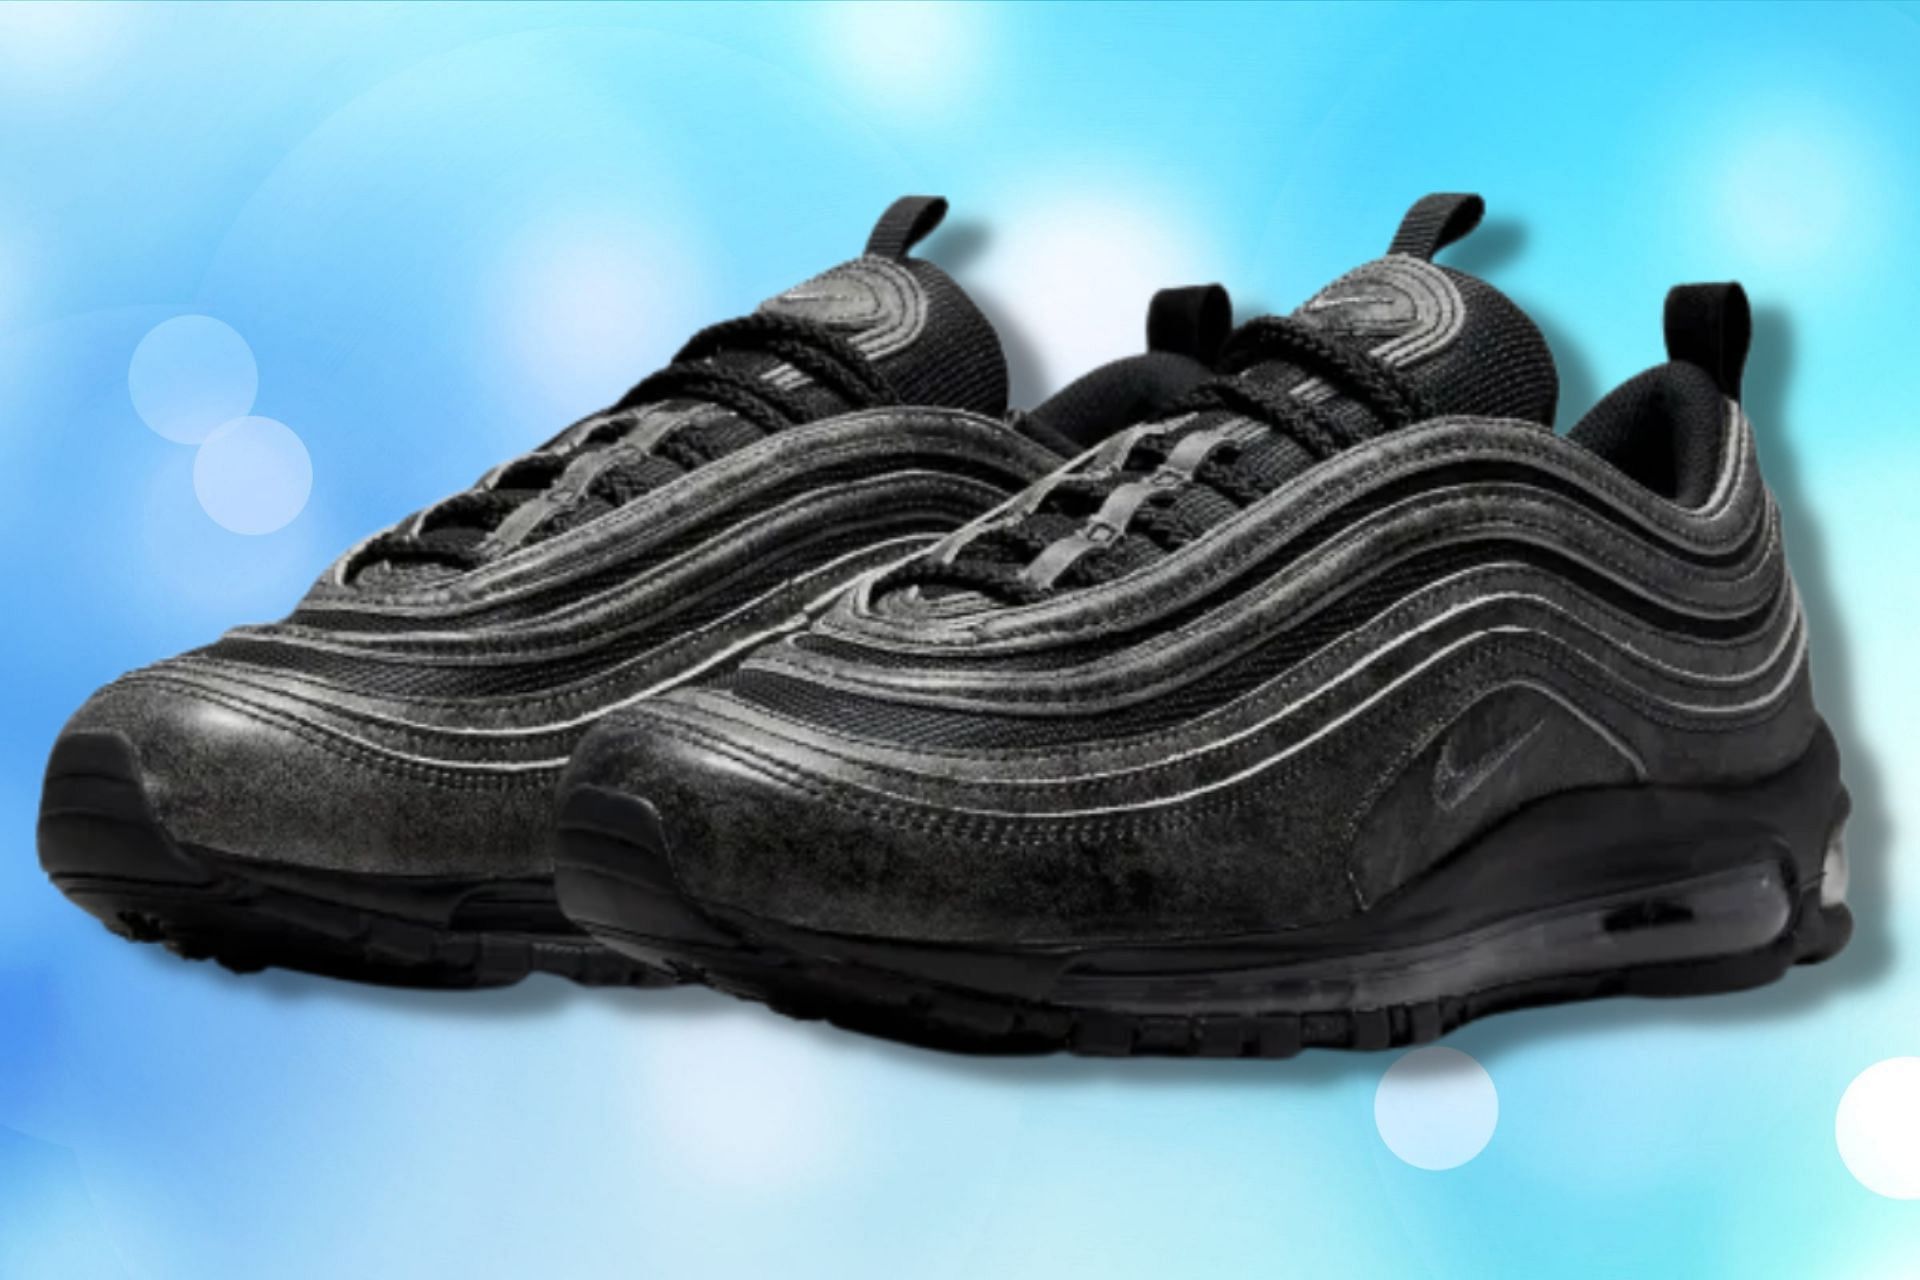 Comme des Garcons x Nike Air Max 97 sneakers (Image via Nike)